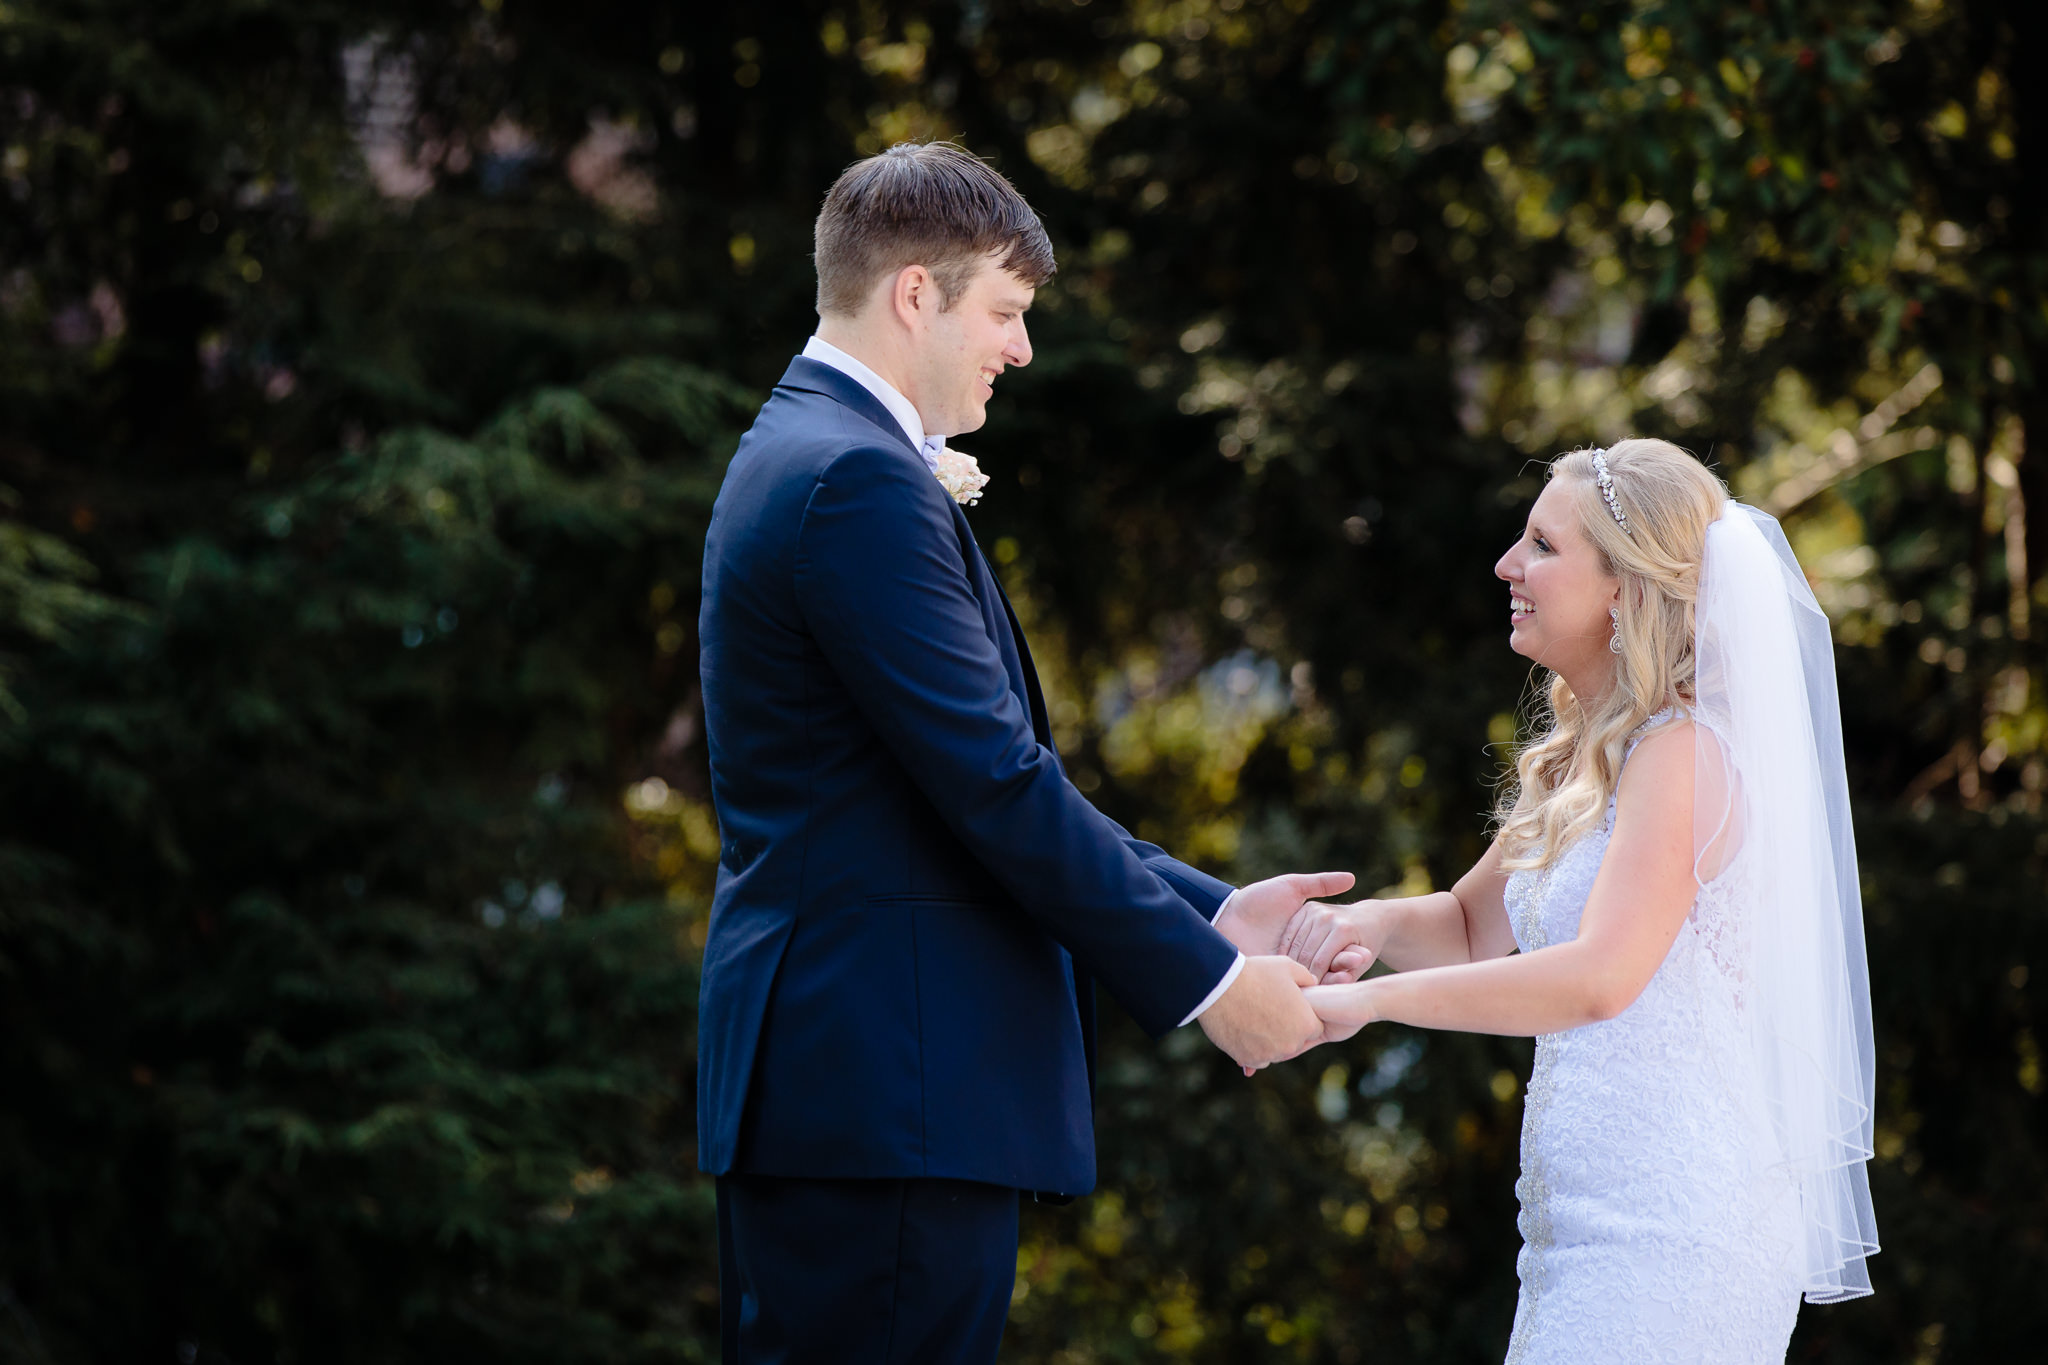 Newlyweds dance together at Duquesne University